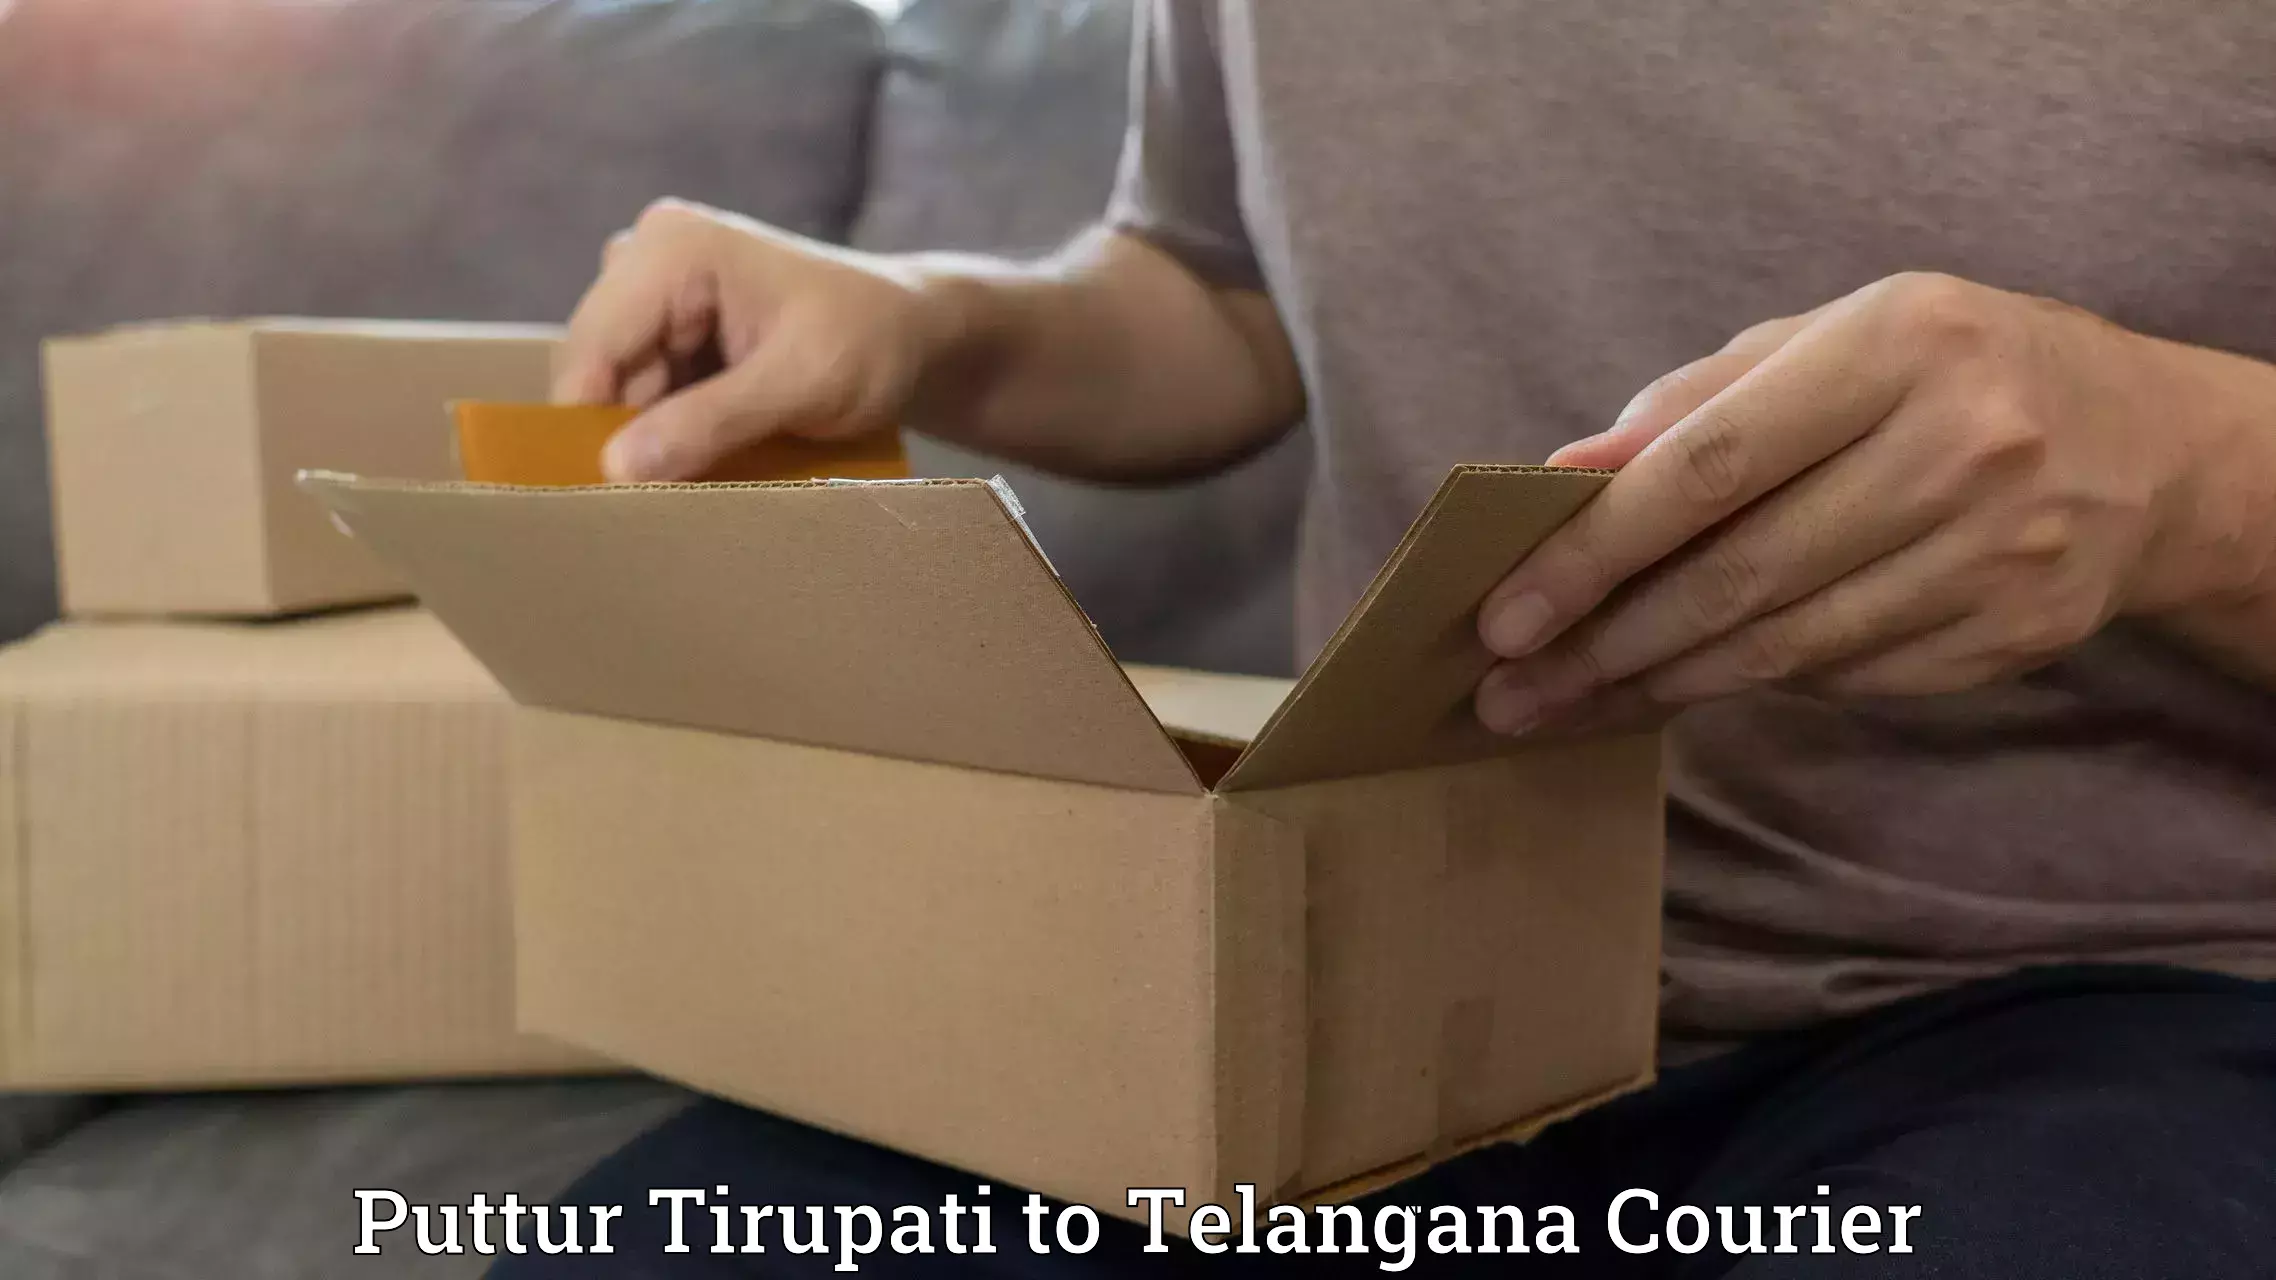 Pharmaceutical courier Puttur Tirupati to Danthalapally